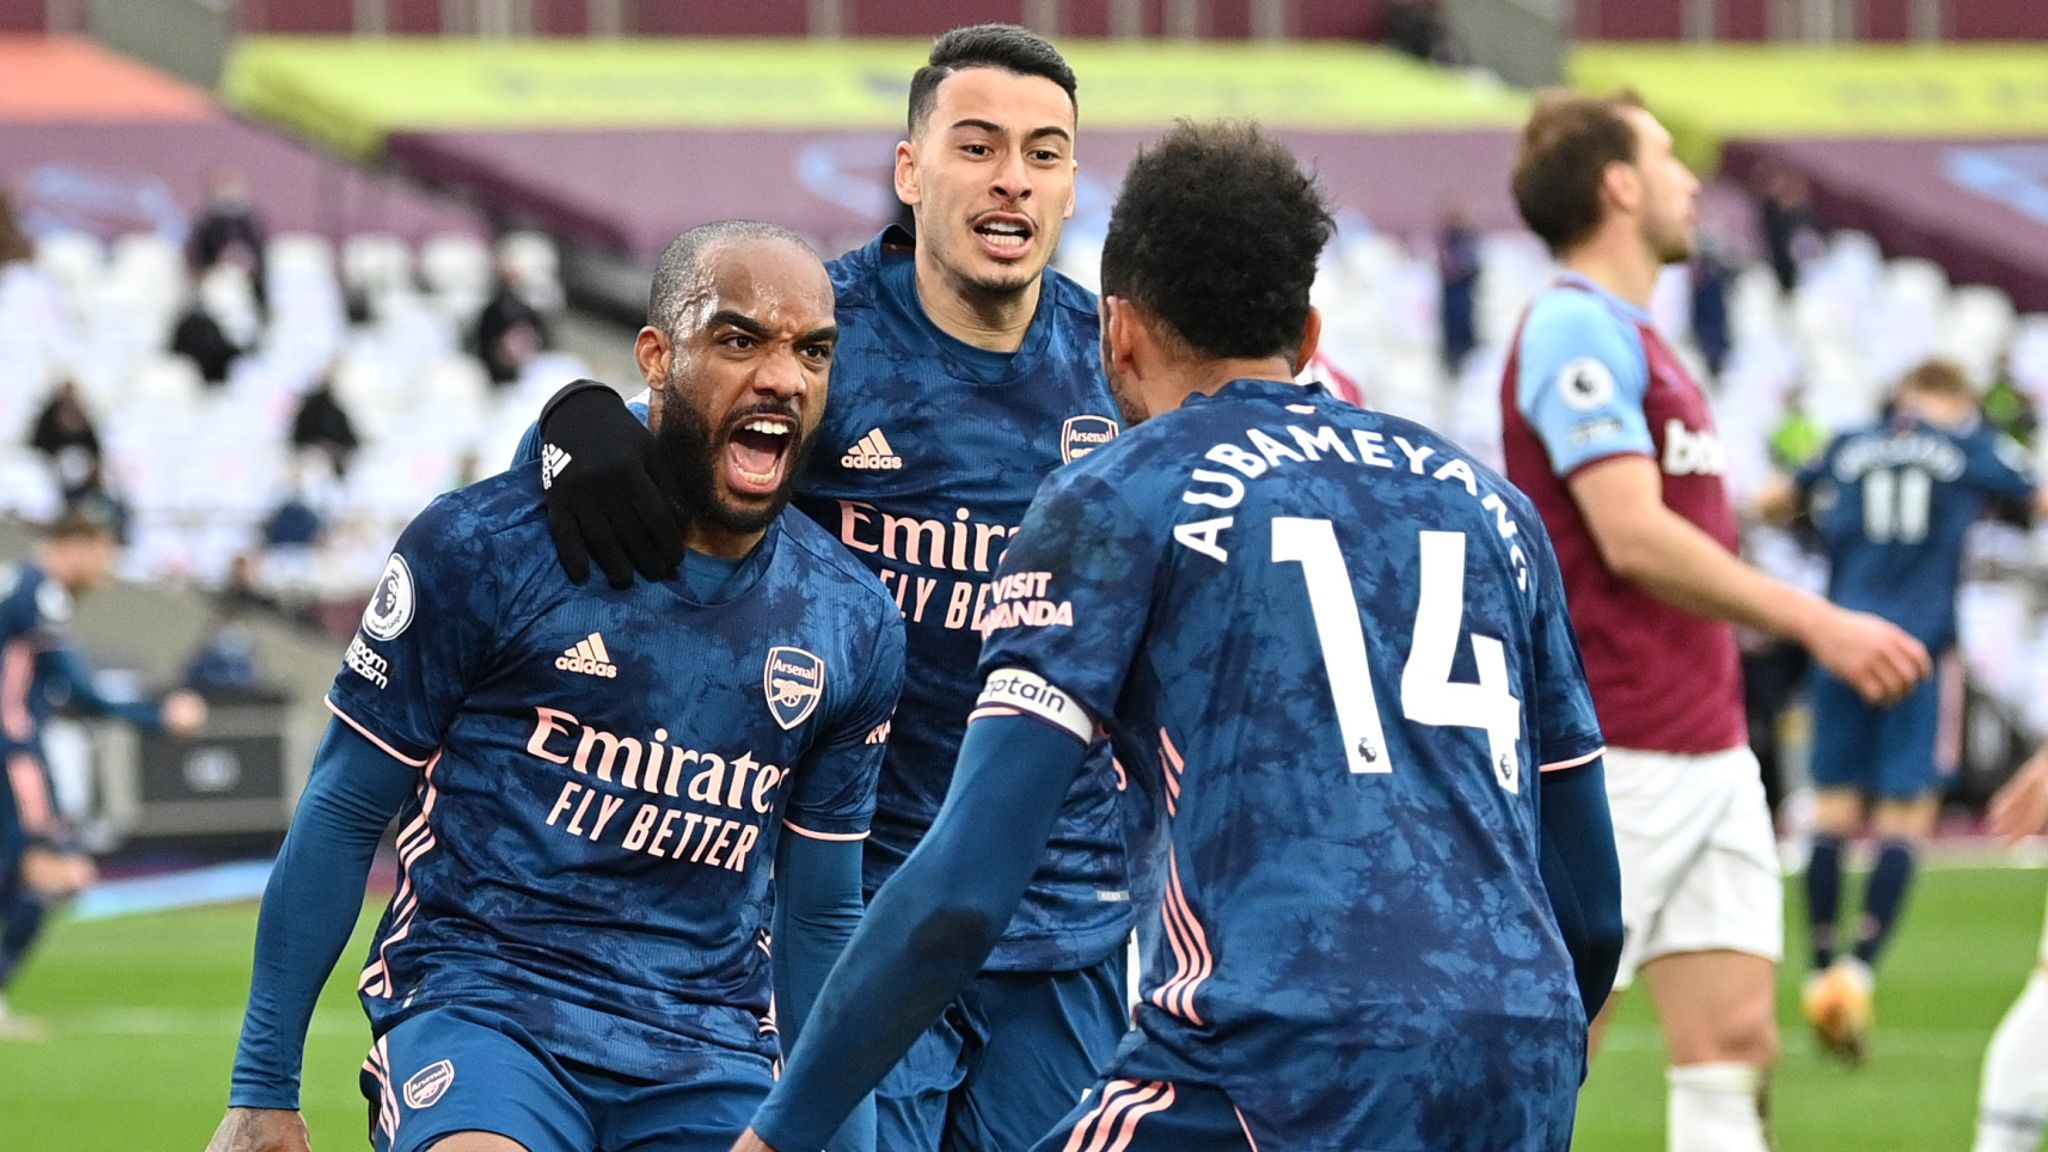 West Ham 3-3 Arsenal: Hammers let slip three-goal lead as Alexandre Lacazette earns point in six-goal thriller | News Sky Sports